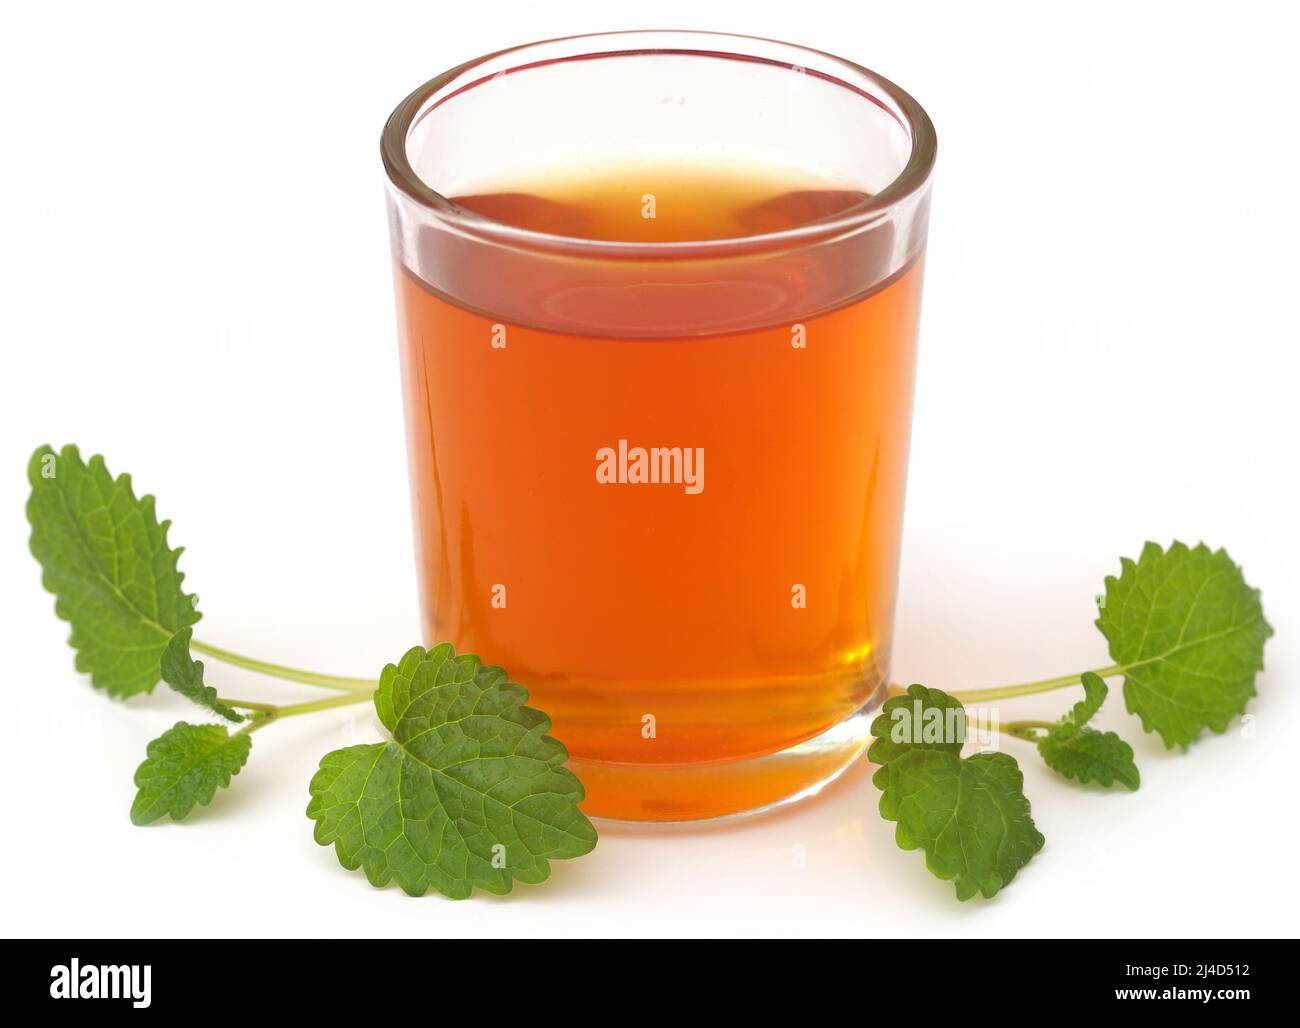 Lemon balm leaves with herbal tea in a transparent glass over white background Stock Photo